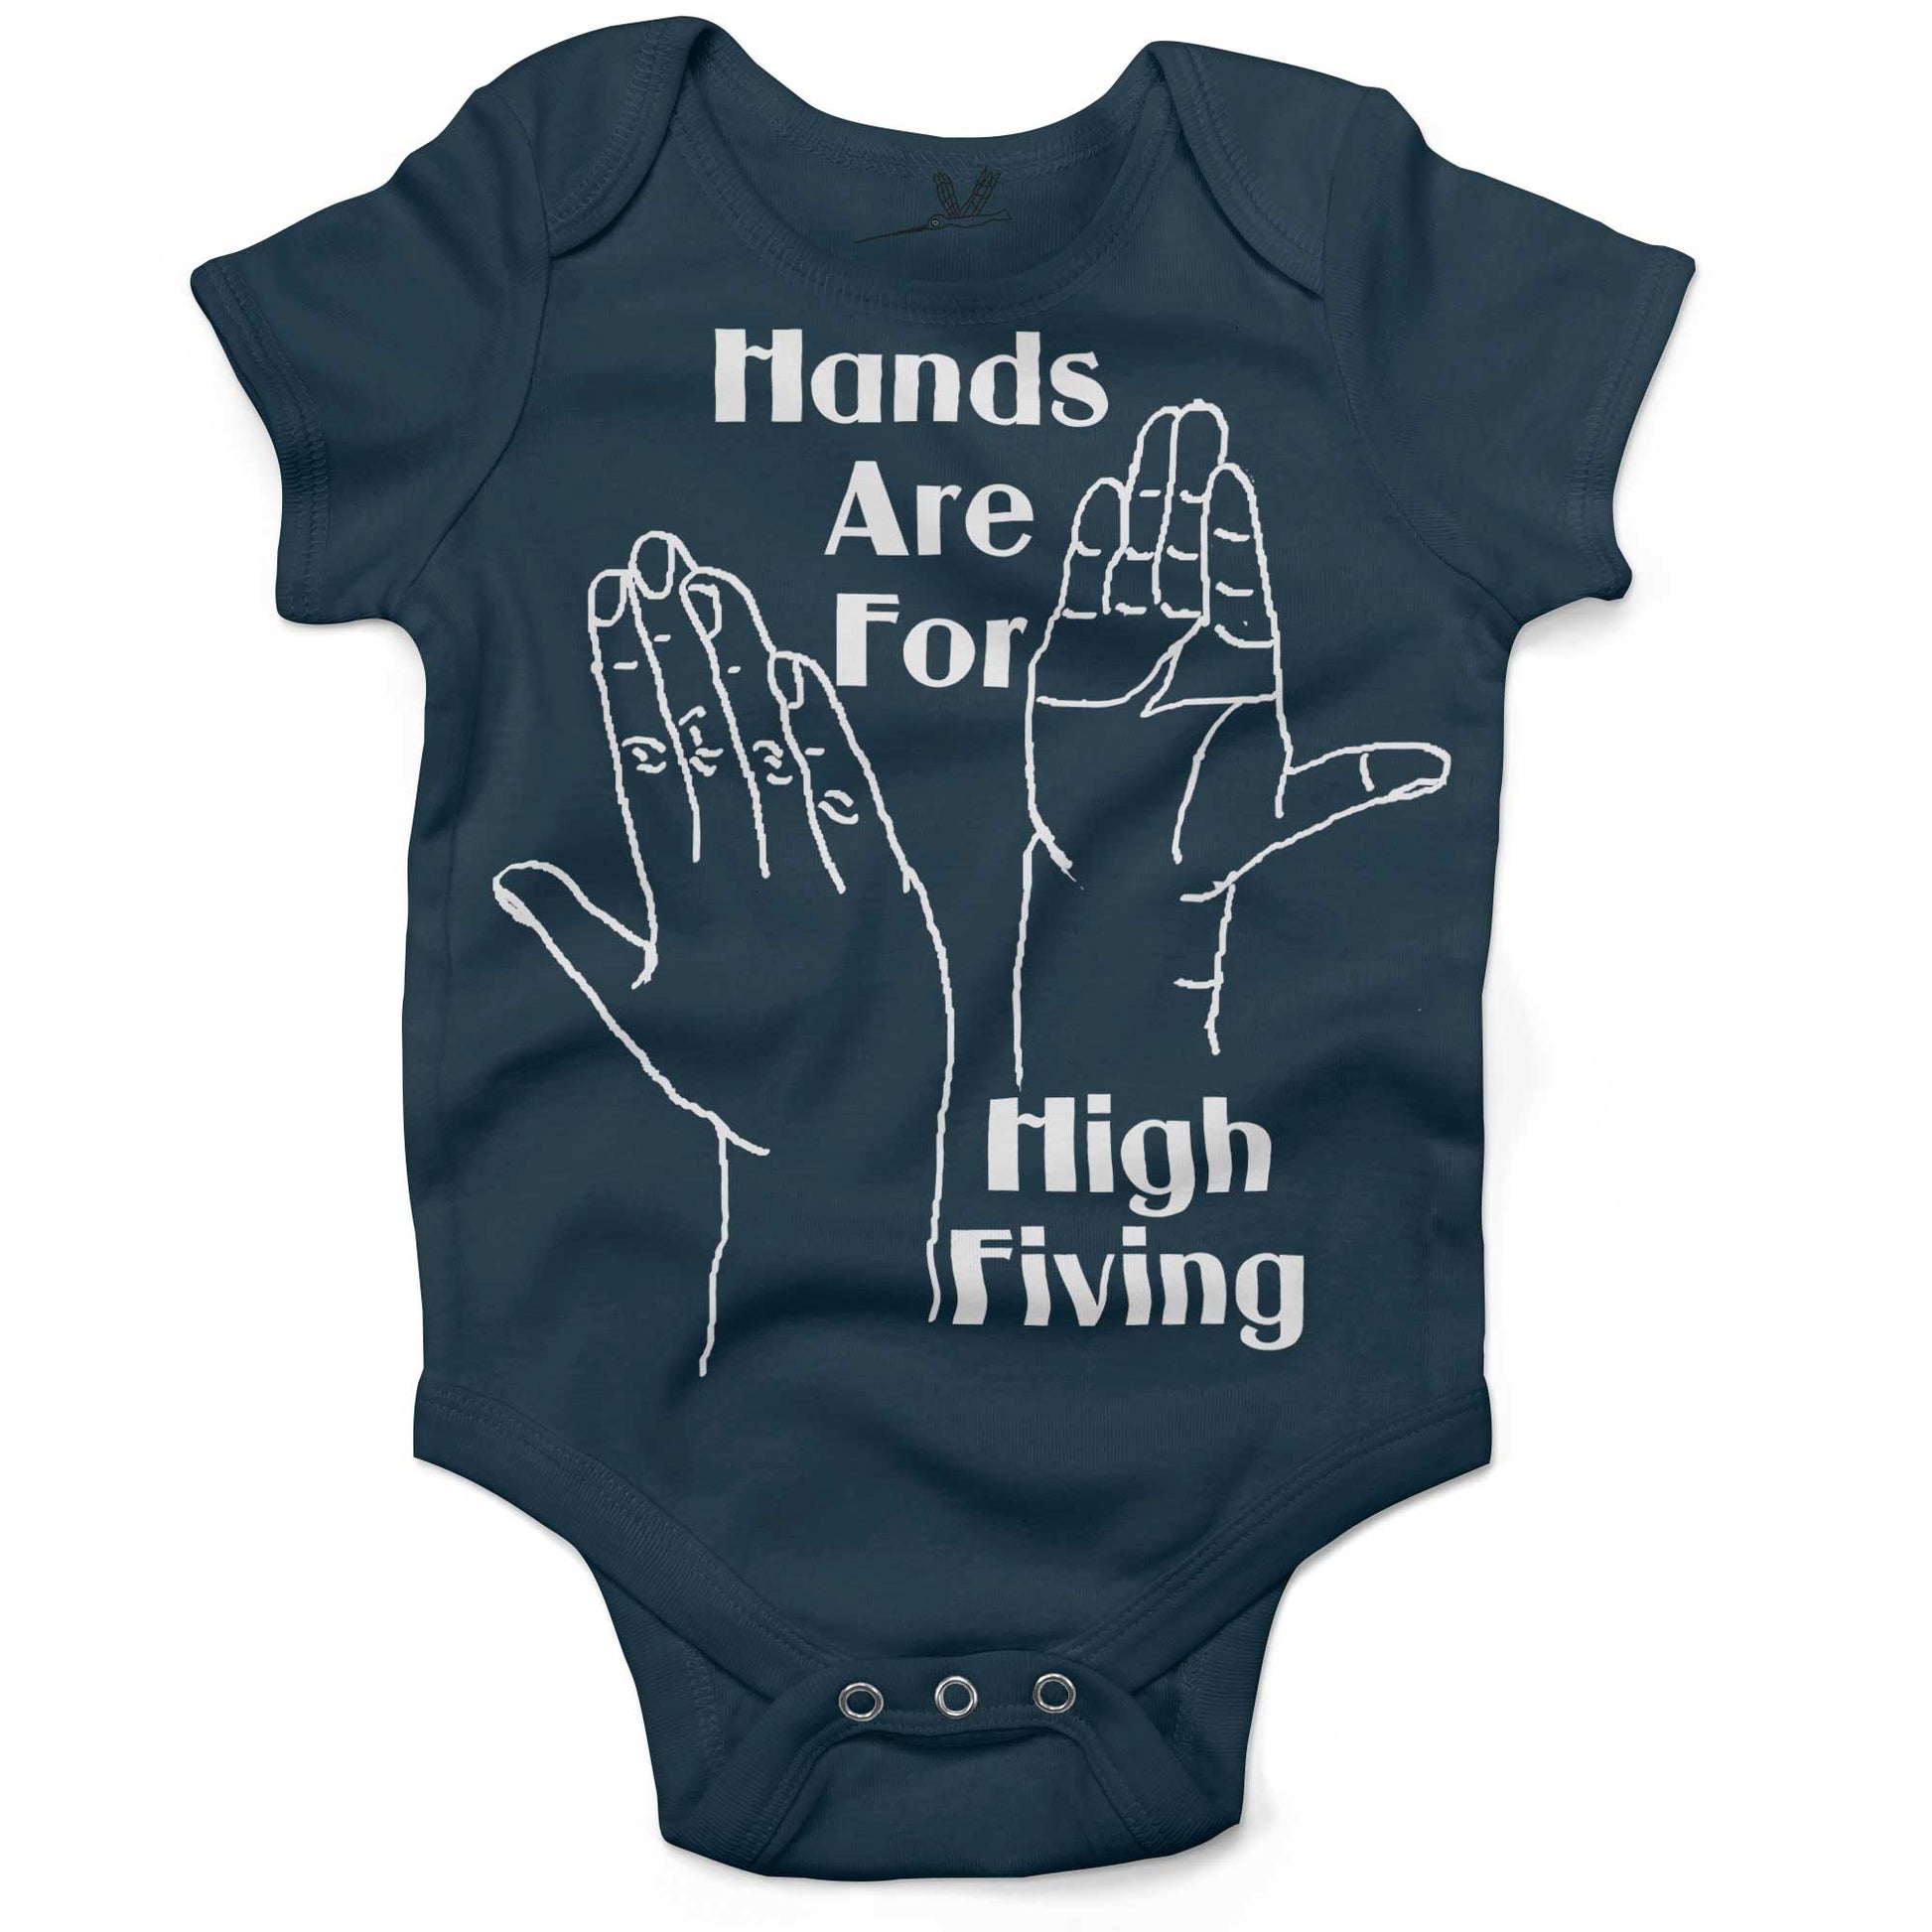 Hands High Fiving Infant Bodysuit or Raglan Tee-Organic Pacific Blue-3-6 months